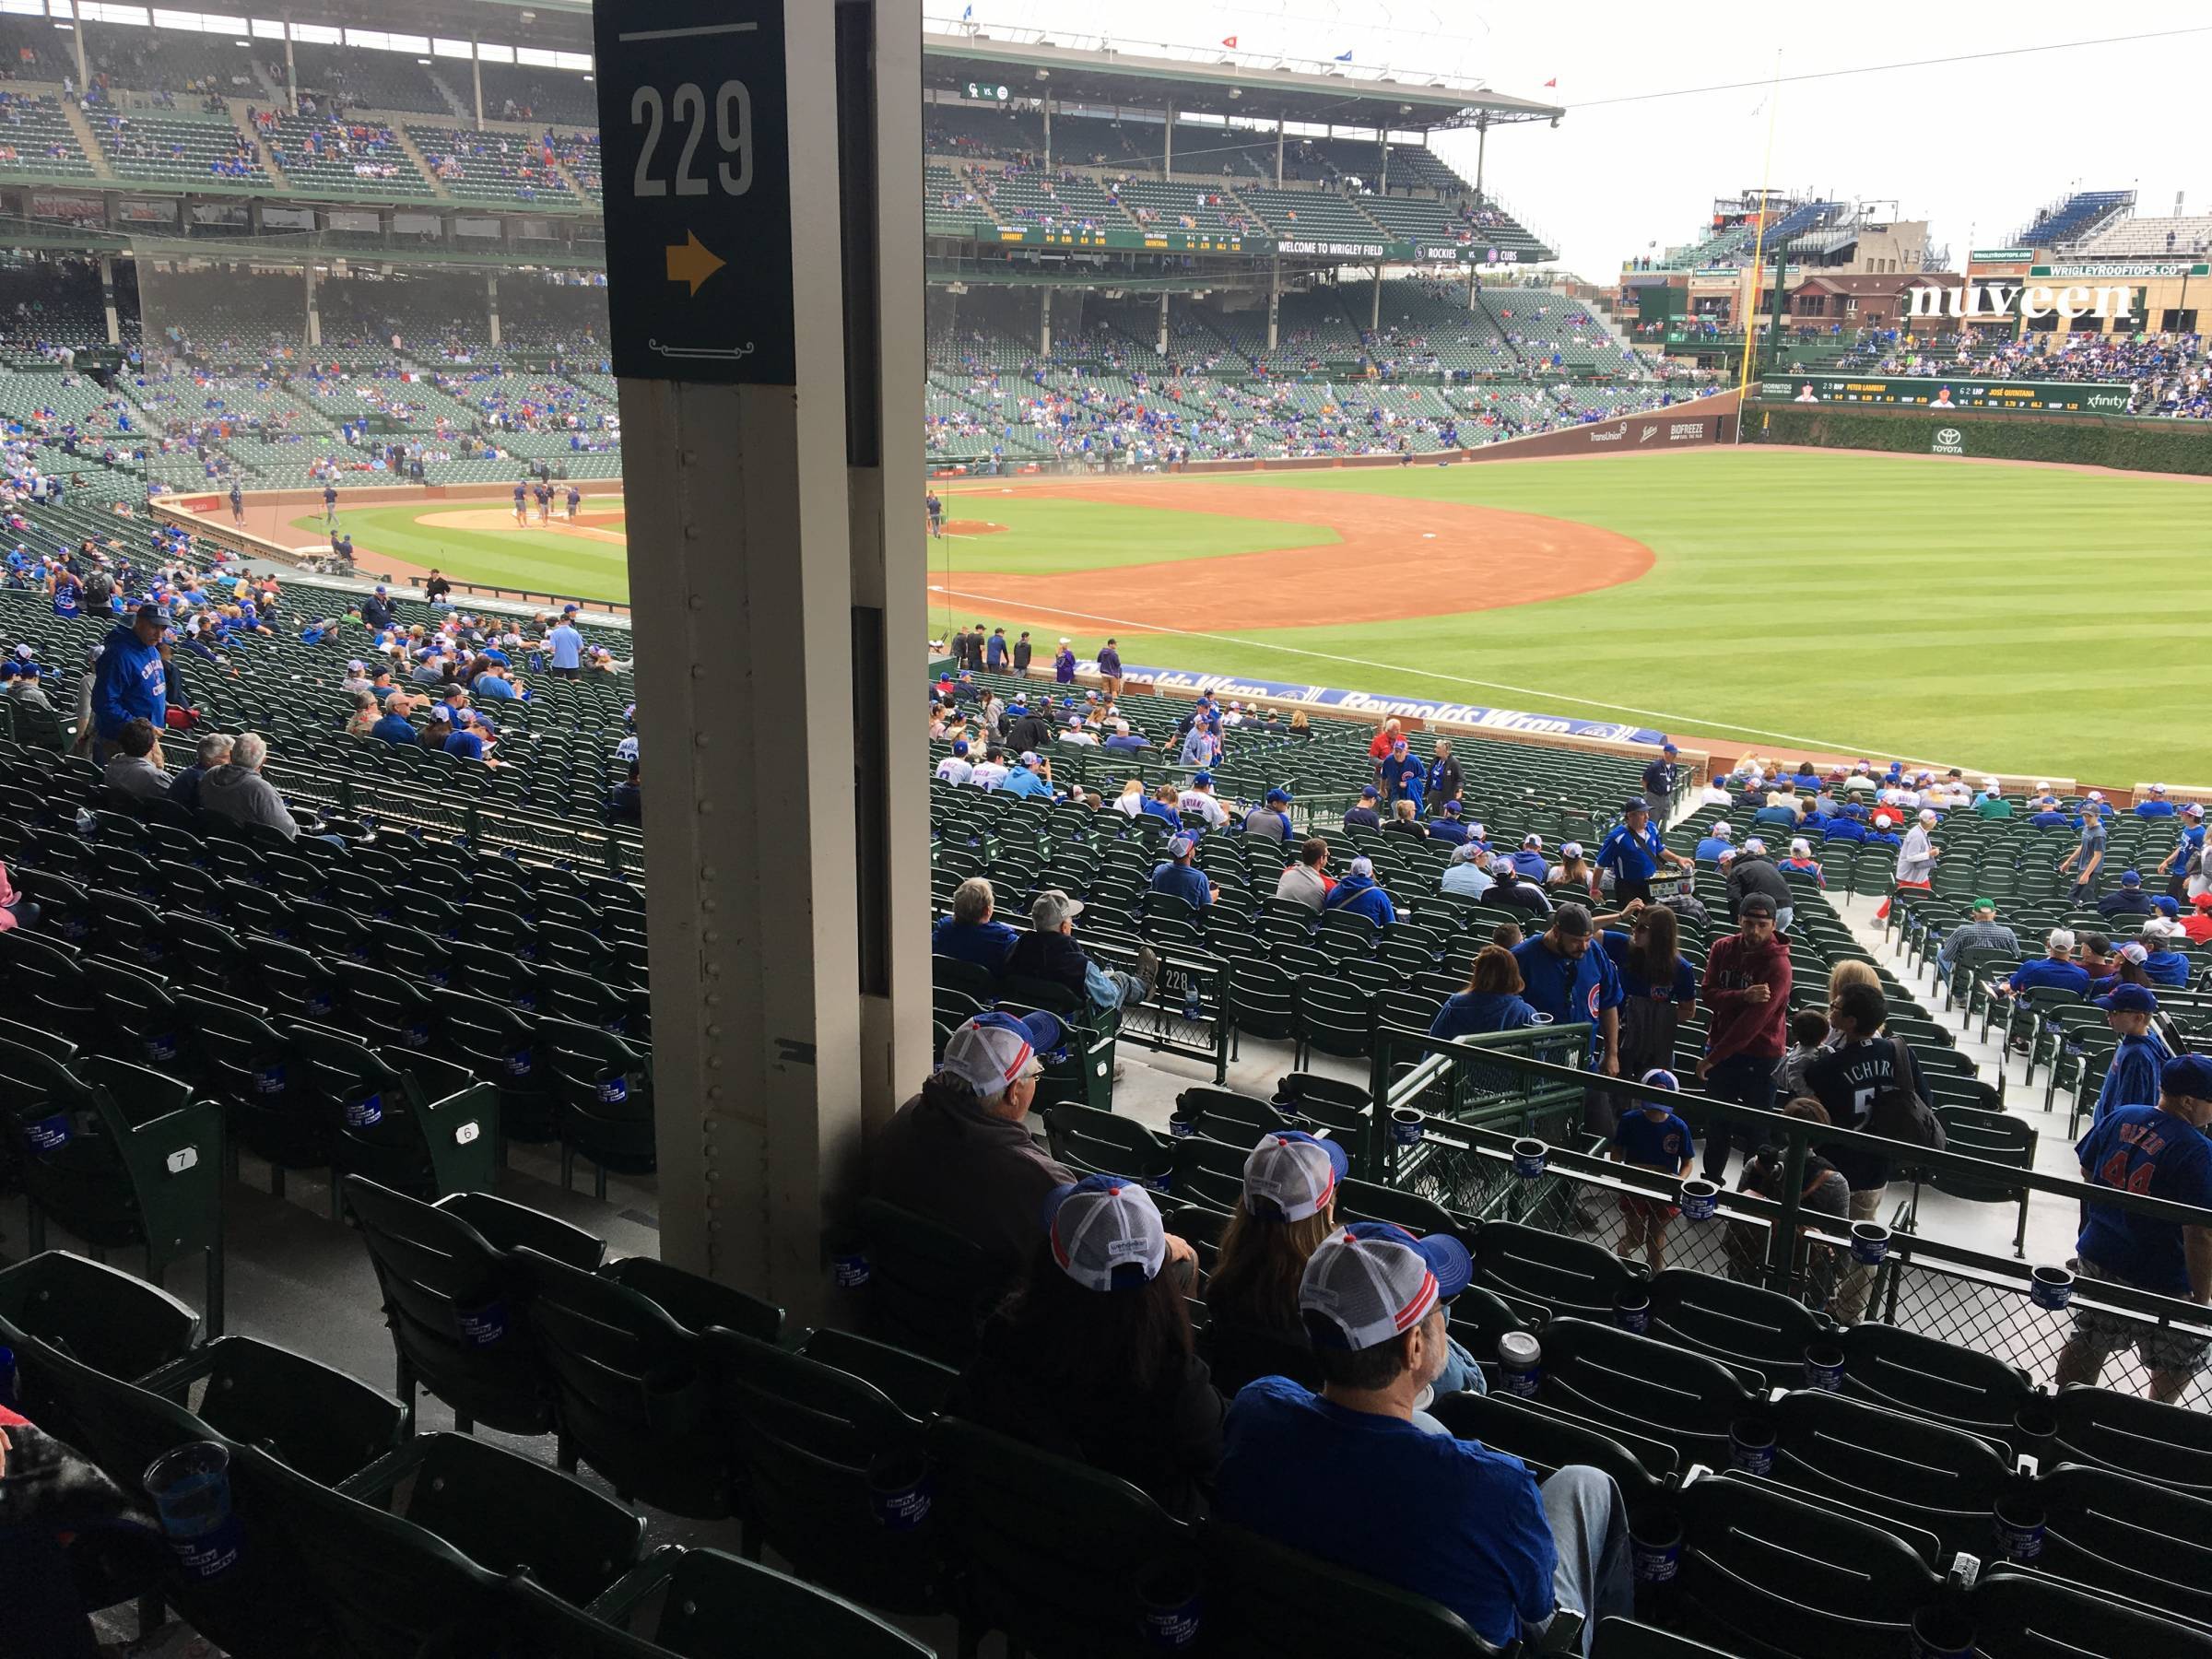 Pole in Section 229 at Wrigley Field